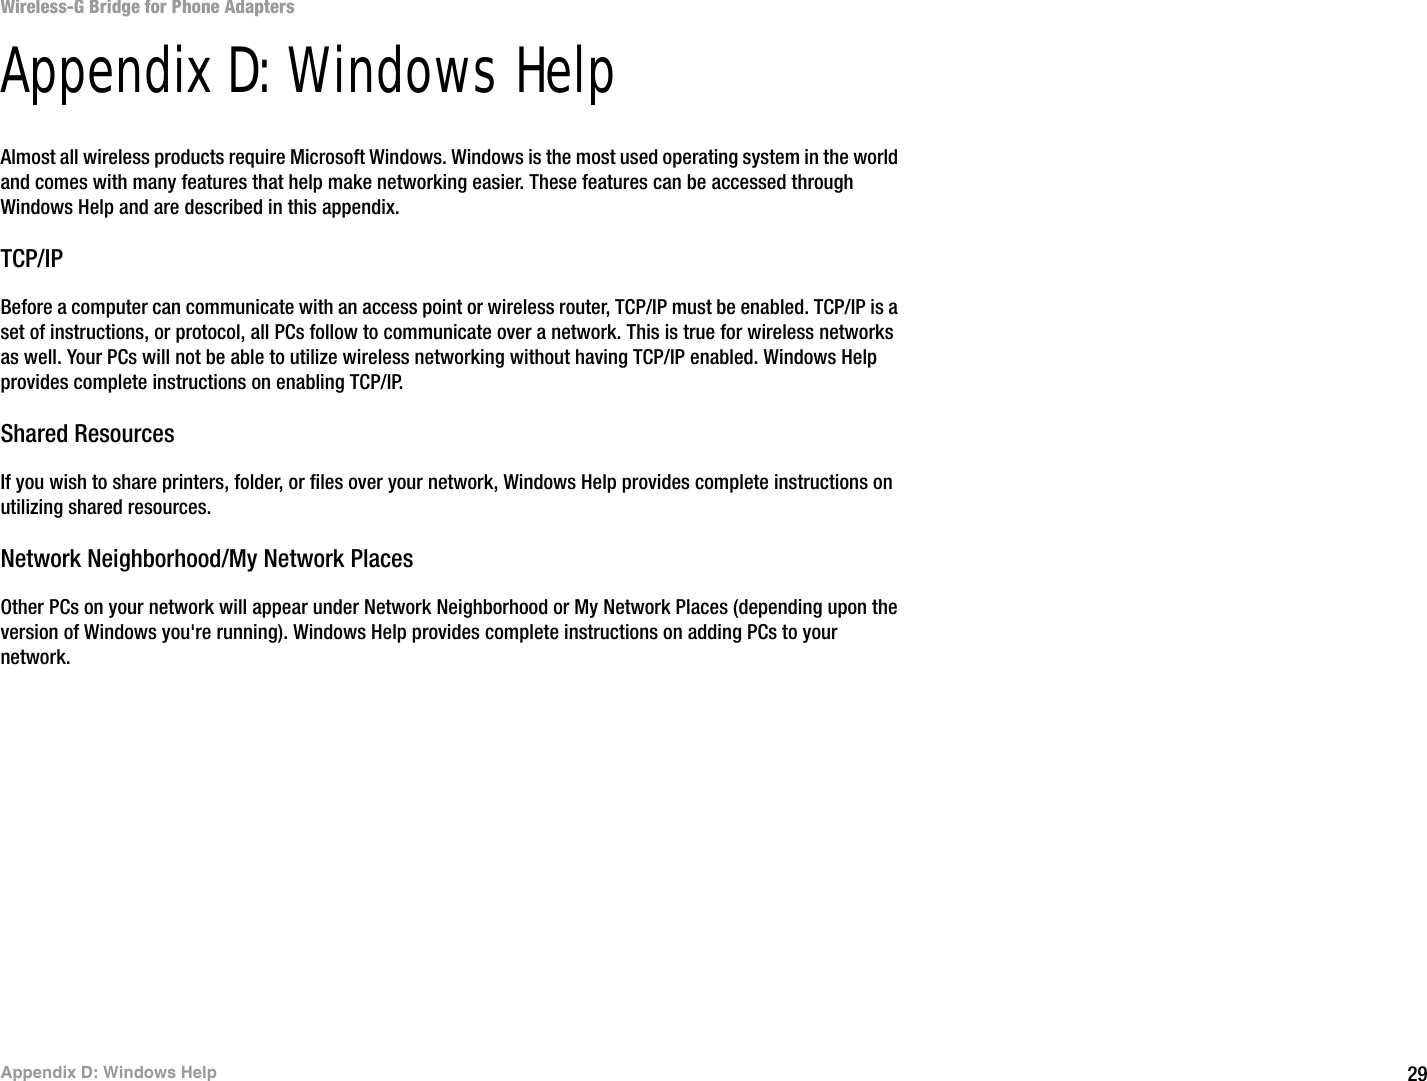 29Appendix D: Windows HelpWireless-G Bridge for Phone AdaptersAppendix D: Windows HelpAlmost all wireless products require Microsoft Windows. Windows is the most used operating system in the world and comes with many features that help make networking easier. These features can be accessed through Windows Help and are described in this appendix.TCP/IPBefore a computer can communicate with an access point or wireless router, TCP/IP must be enabled. TCP/IP is a set of instructions, or protocol, all PCs follow to communicate over a network. This is true for wireless networks as well. Your PCs will not be able to utilize wireless networking without having TCP/IP enabled. Windows Help provides complete instructions on enabling TCP/IP.Shared ResourcesIf you wish to share printers, folder, or files over your network, Windows Help provides complete instructions on utilizing shared resources.Network Neighborhood/My Network PlacesOther PCs on your network will appear under Network Neighborhood or My Network Places (depending upon the version of Windows you&apos;re running). Windows Help provides complete instructions on adding PCs to your network.